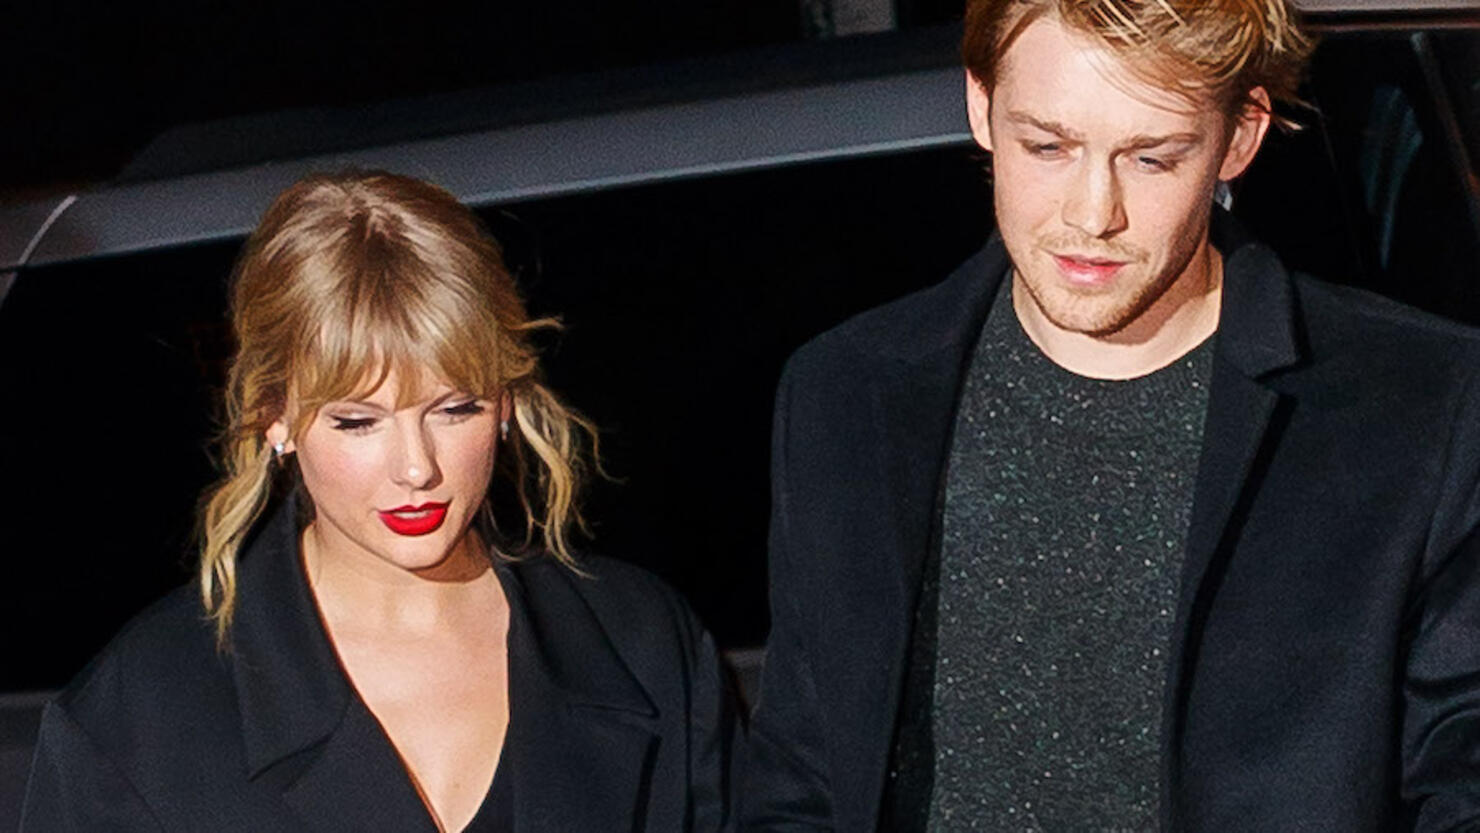 Taylor Swift And Joe Alwyn Spark Engagement Rumors After Romantic Trip | iHeart